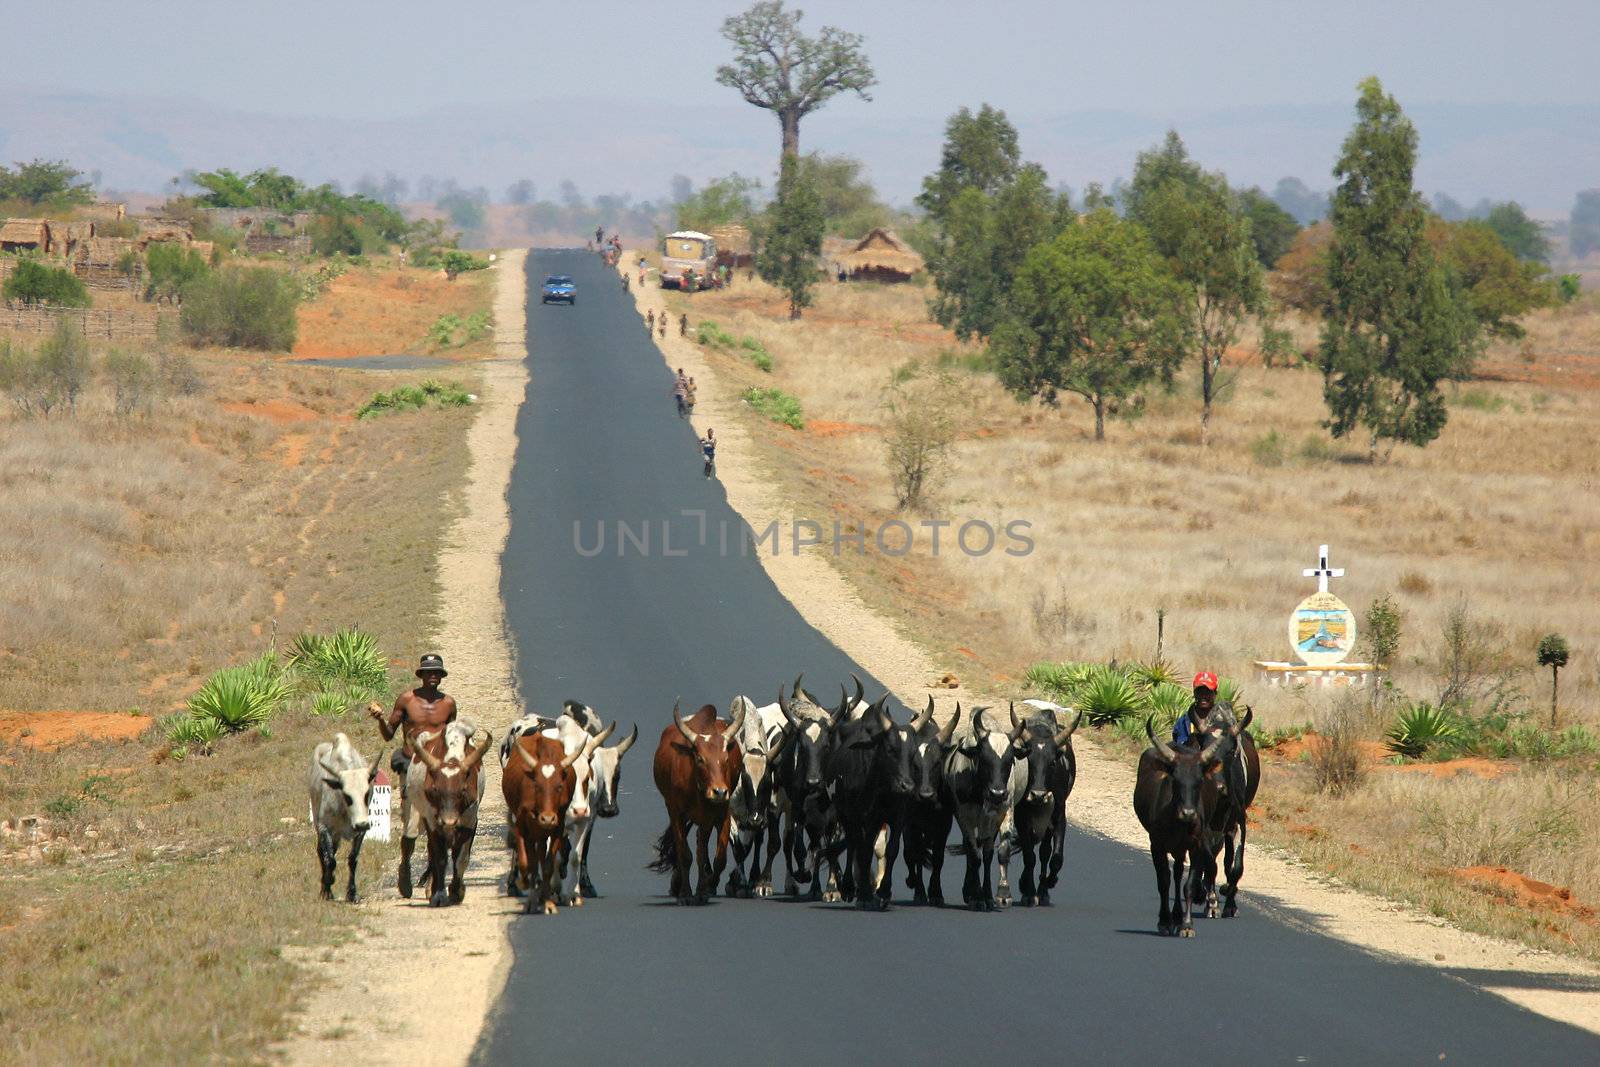 Farmers bringing their cattle from one place to the next in the blistering heat